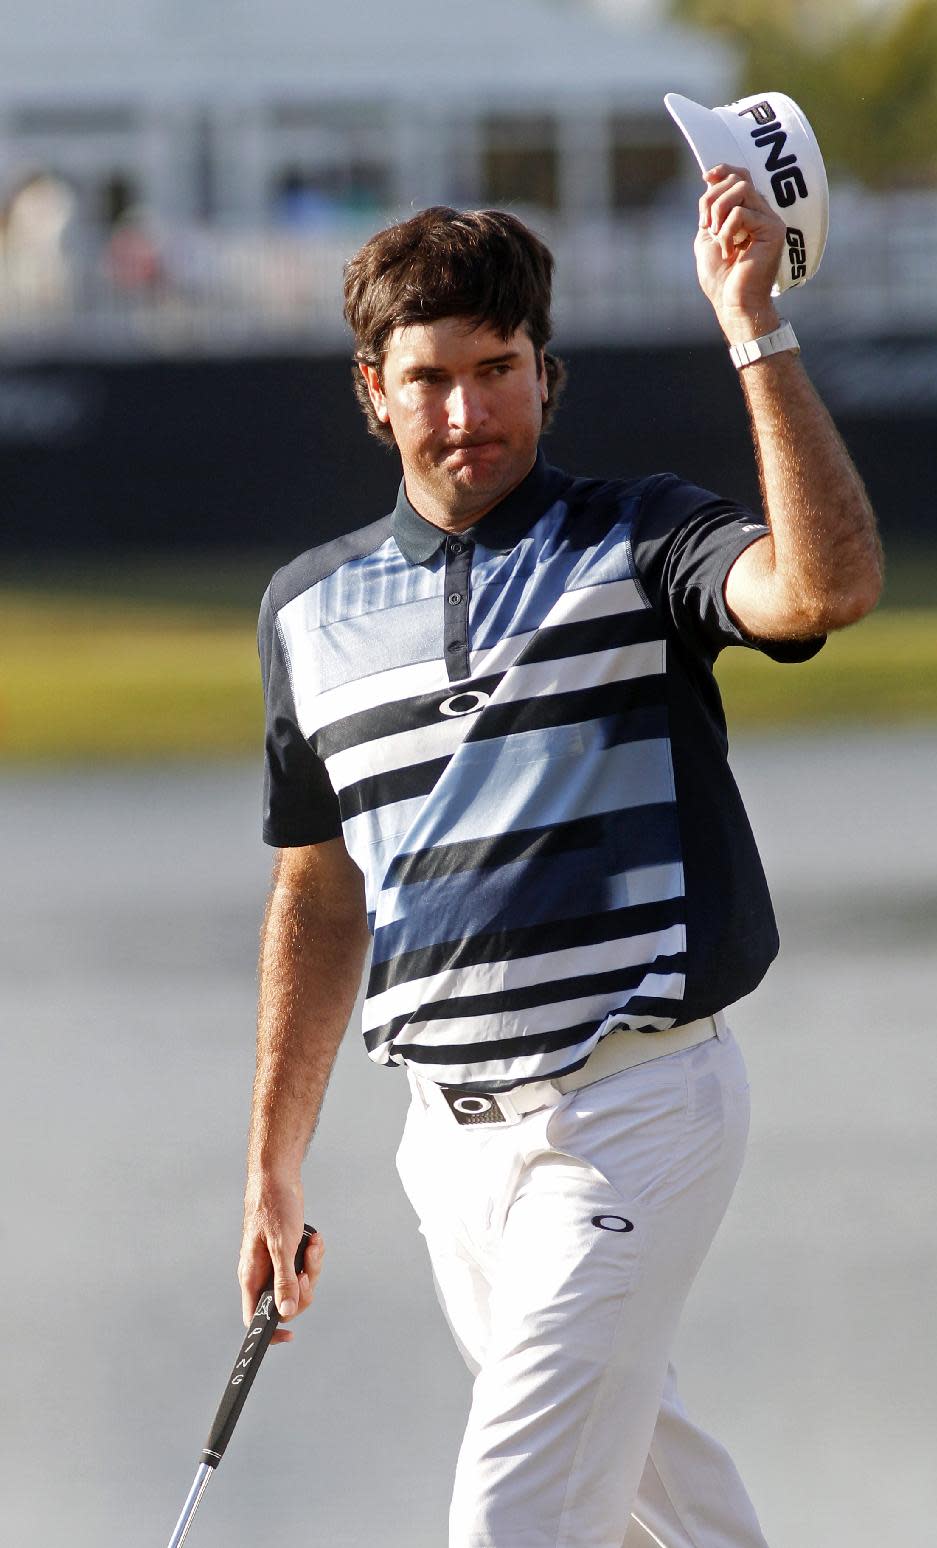 Bubba Watson raises his hat on the 18th green during the final round of the Cadillac Championship golf tournament Sunday, March 9, 2014, in Doral, Fla. (AP Photo/Marta Lavandier)